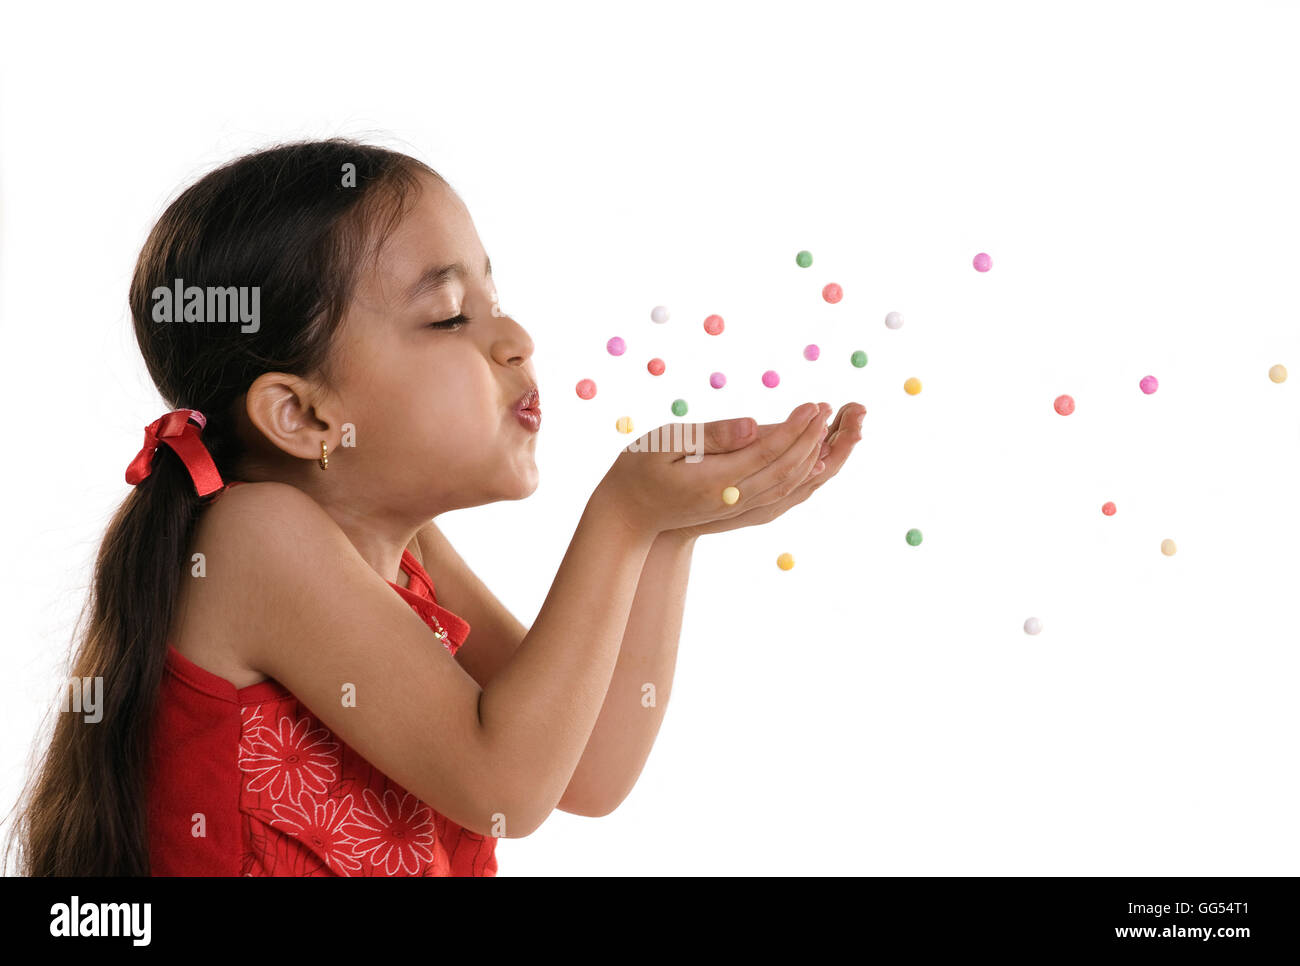 A little girl blowing confetti Banque D'Images